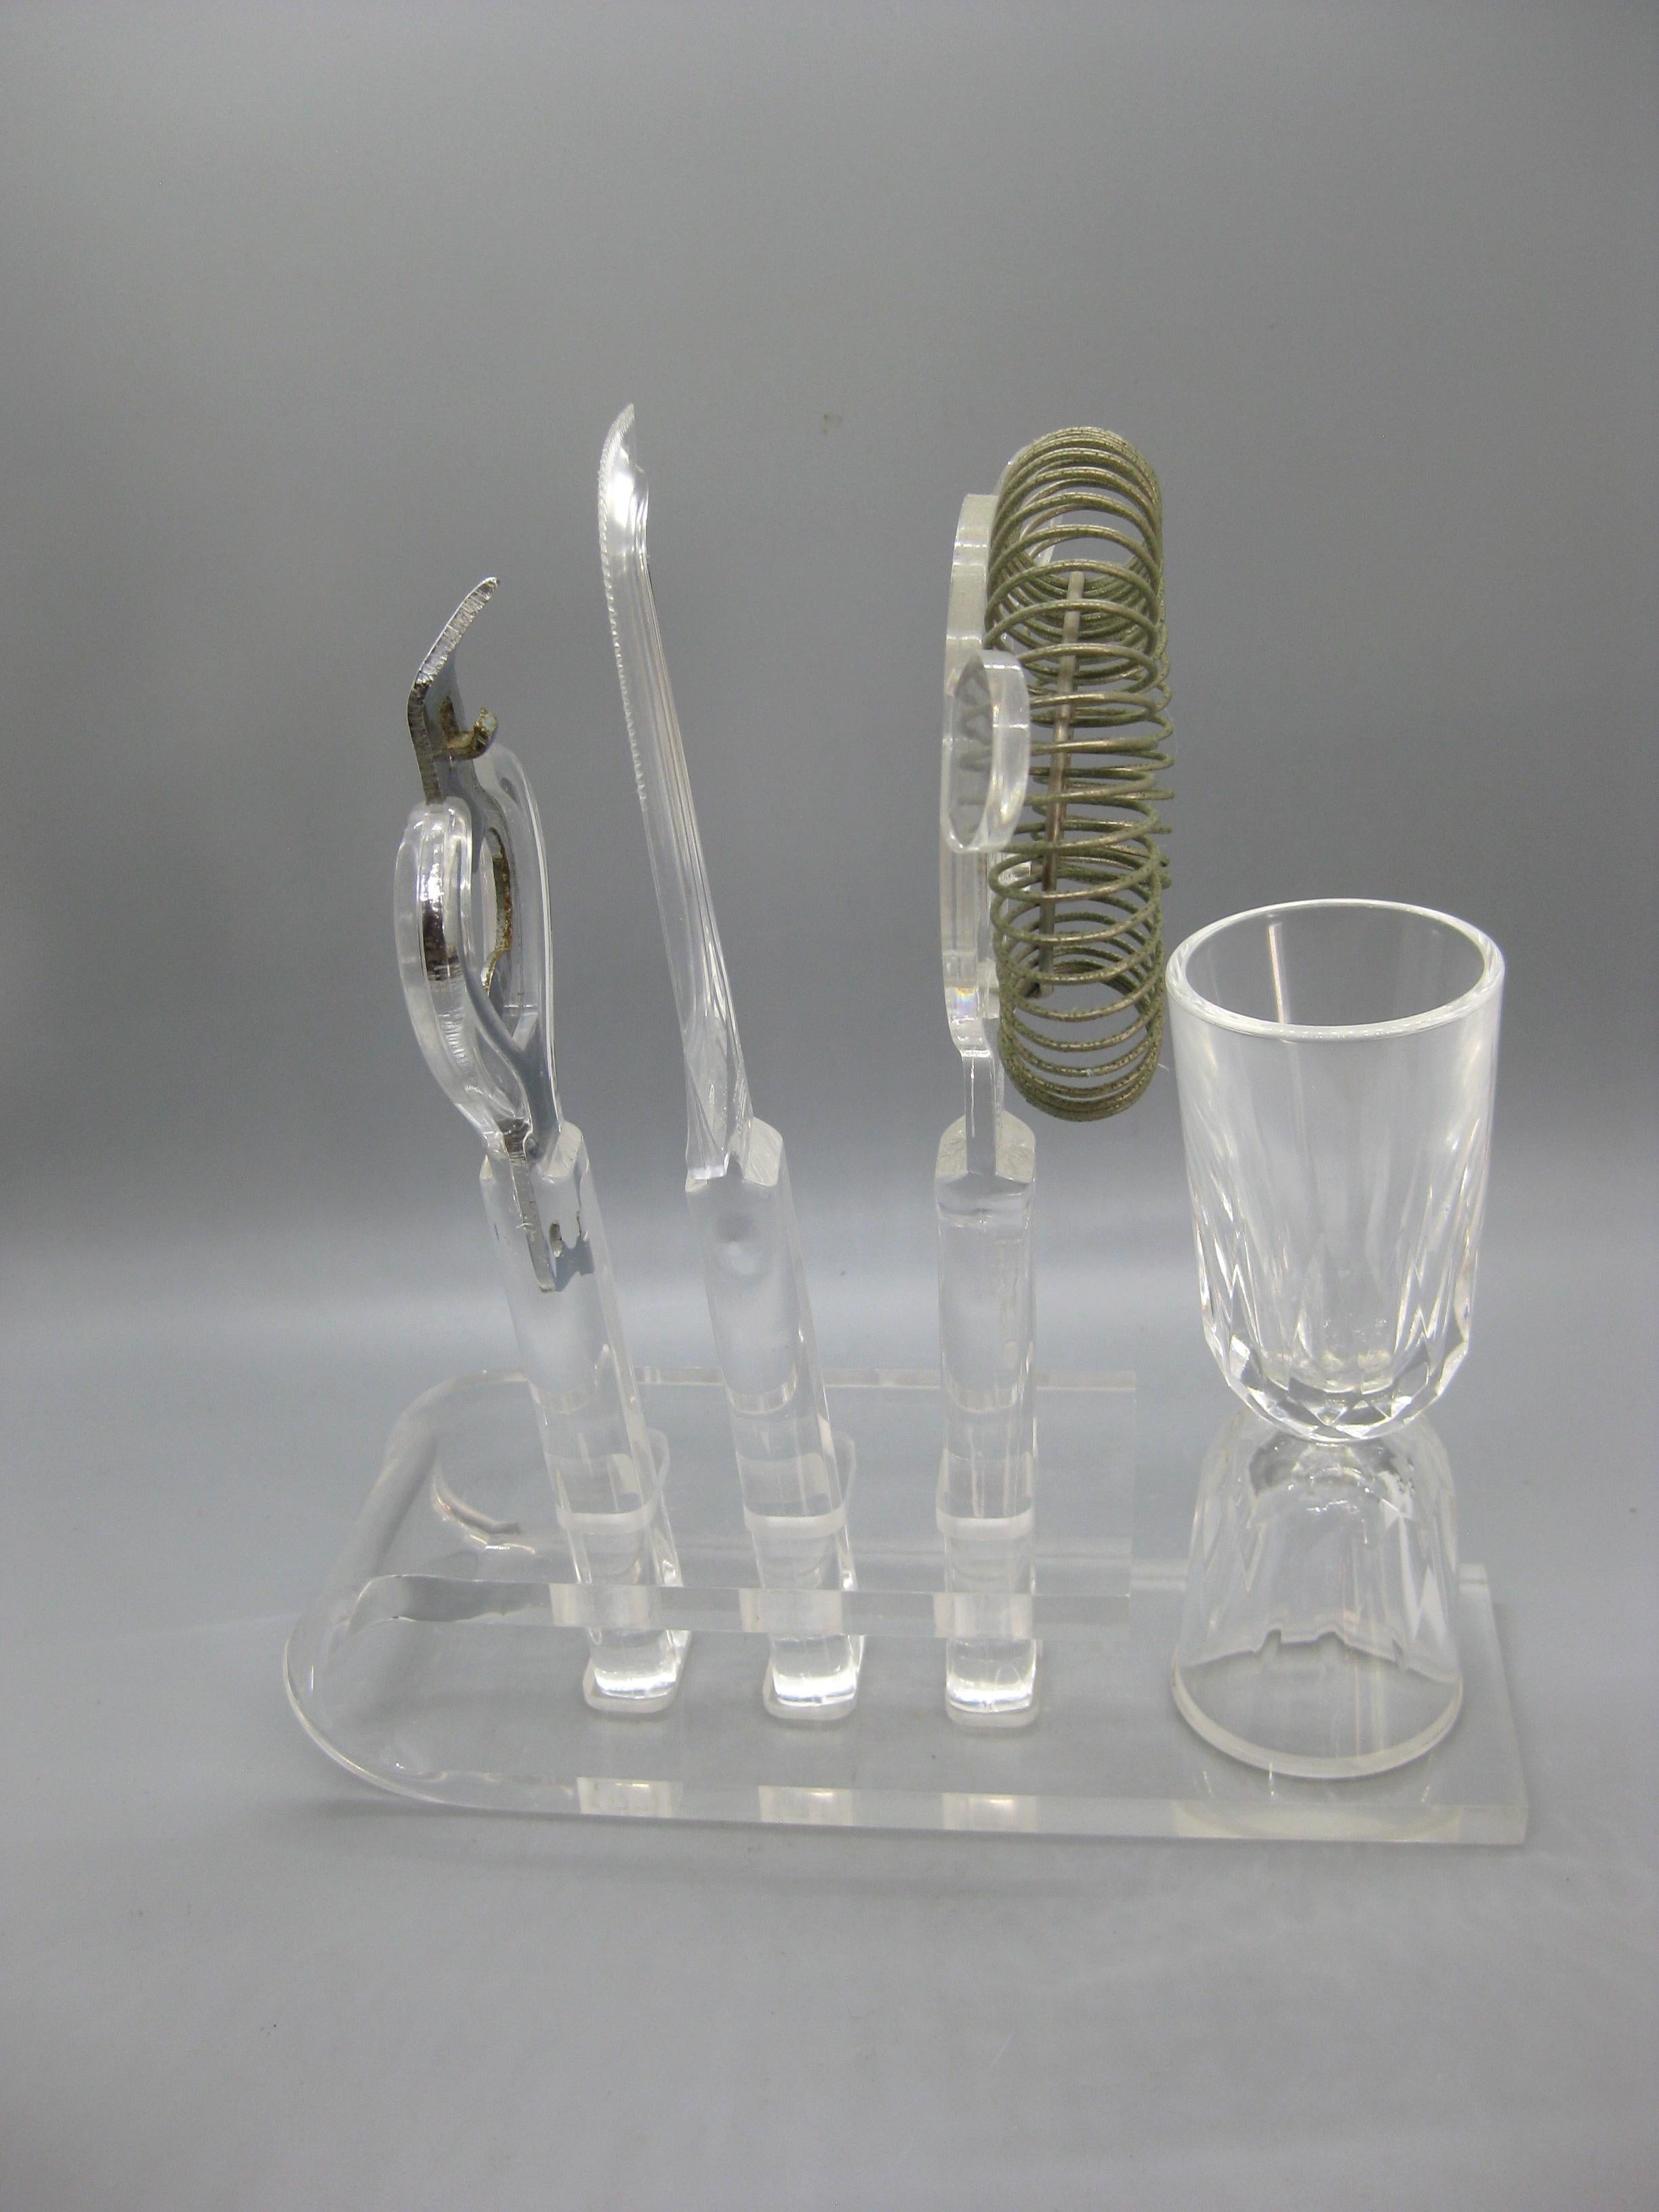 20th Century Vintage 1970's Lucite Acrylic Bar Tool Set Barware Serving Pieces w/Caddy For Sale